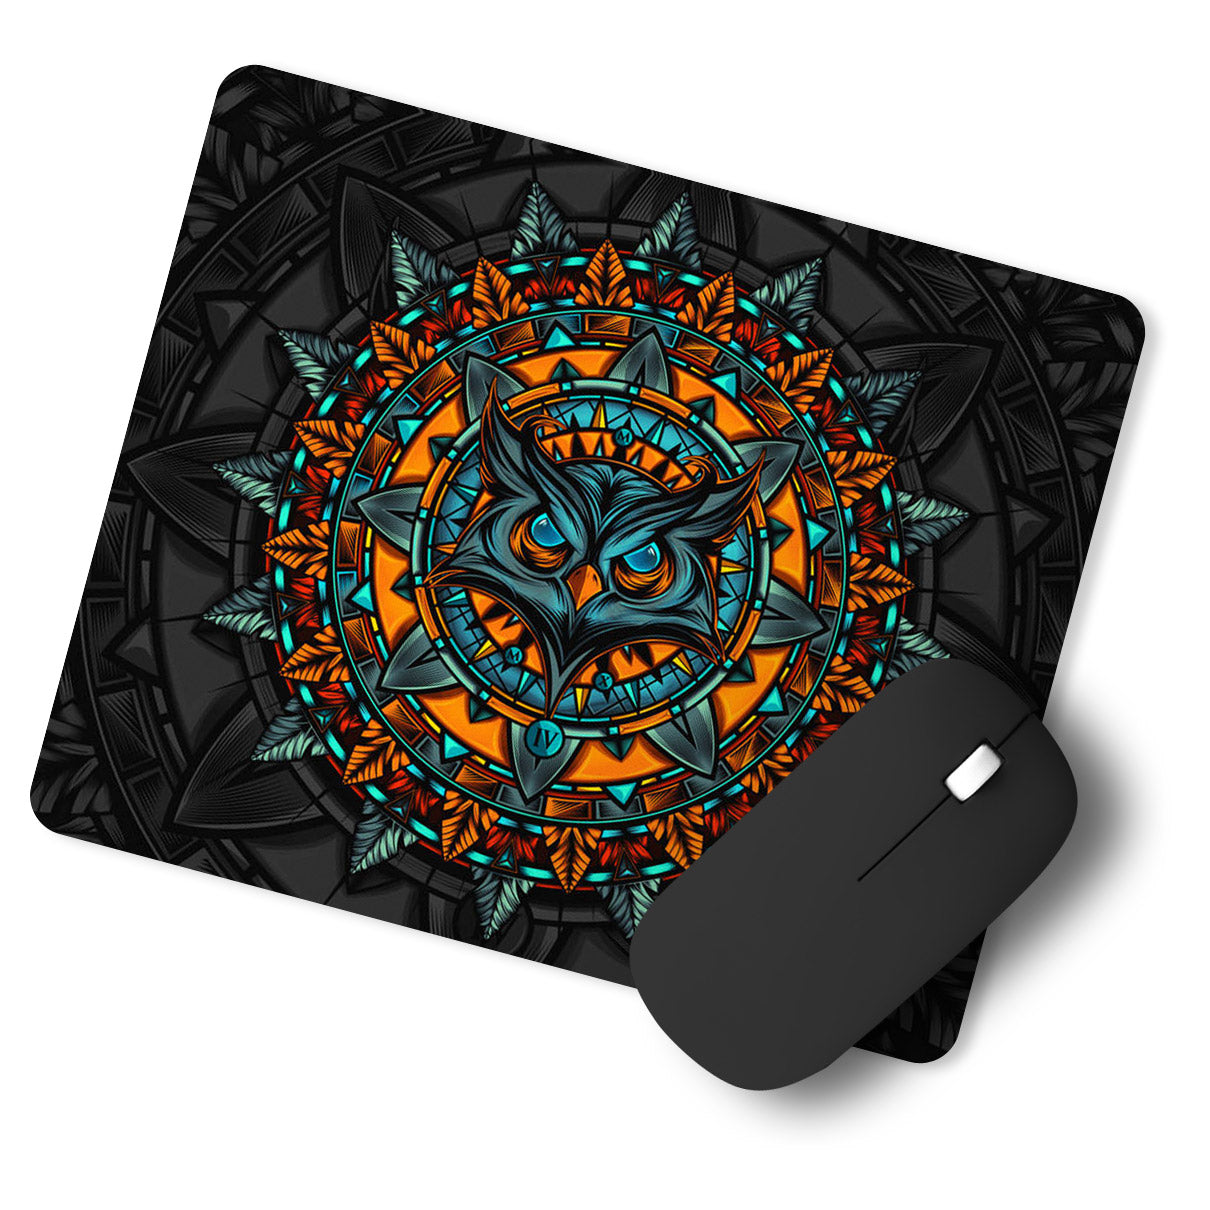 Own Art Abstract Designer Printed Premium Mouse pad (9 in x 7.5 in)